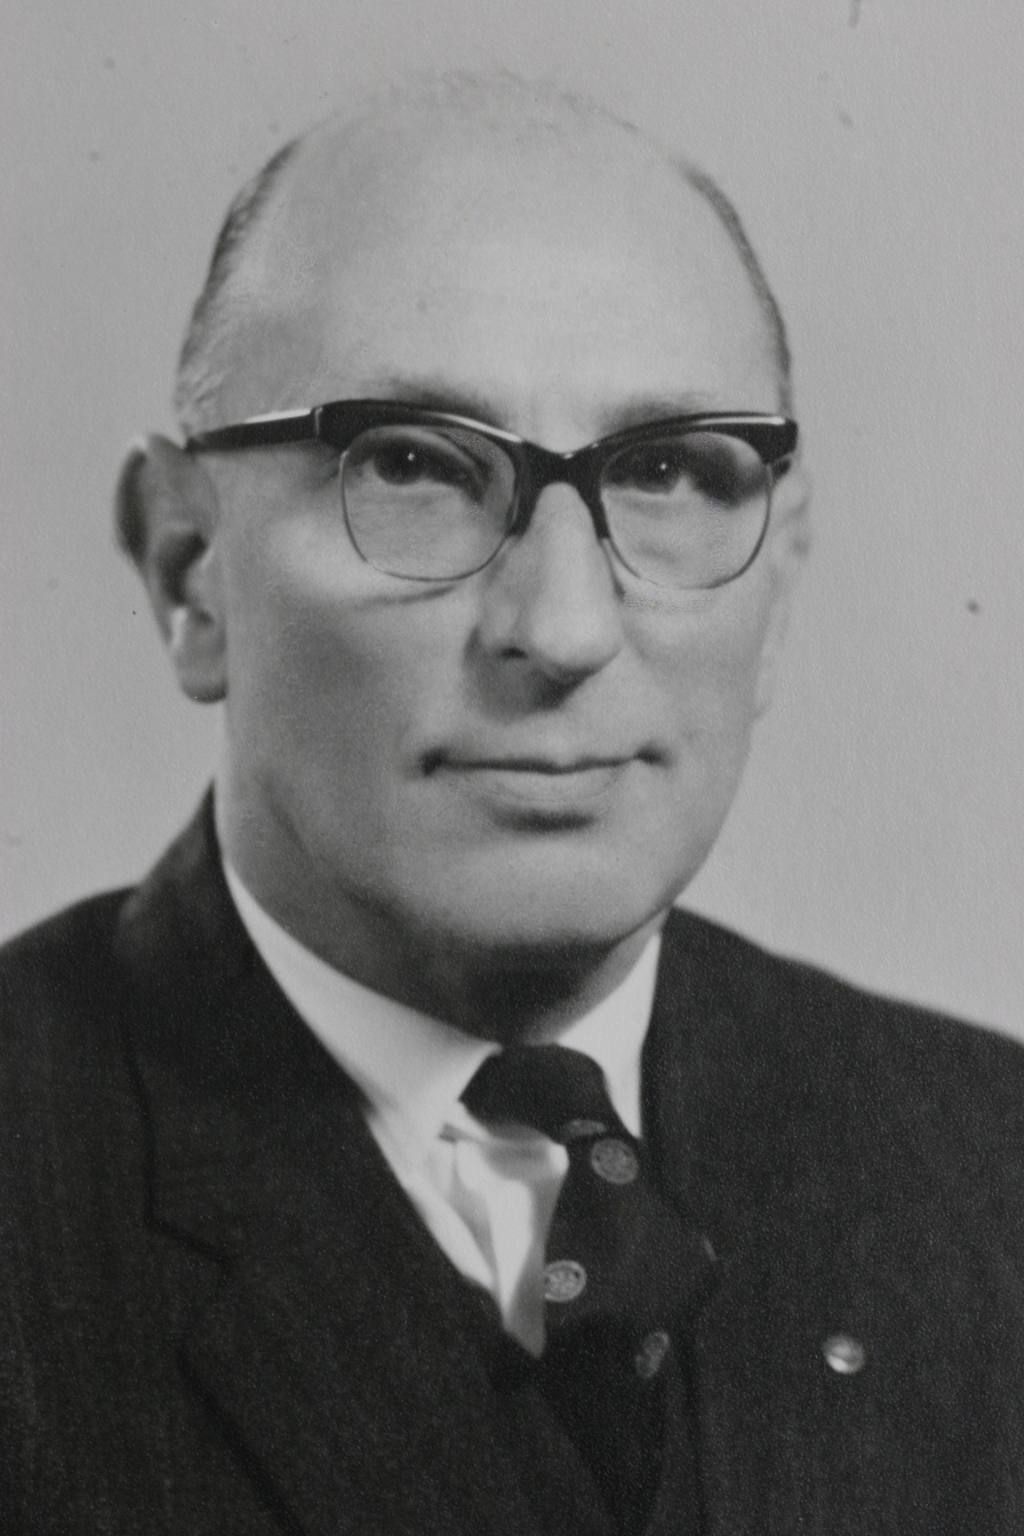 Past Presidents 1960-1969 (click here) - Dudley G. H. Keen 1964/5